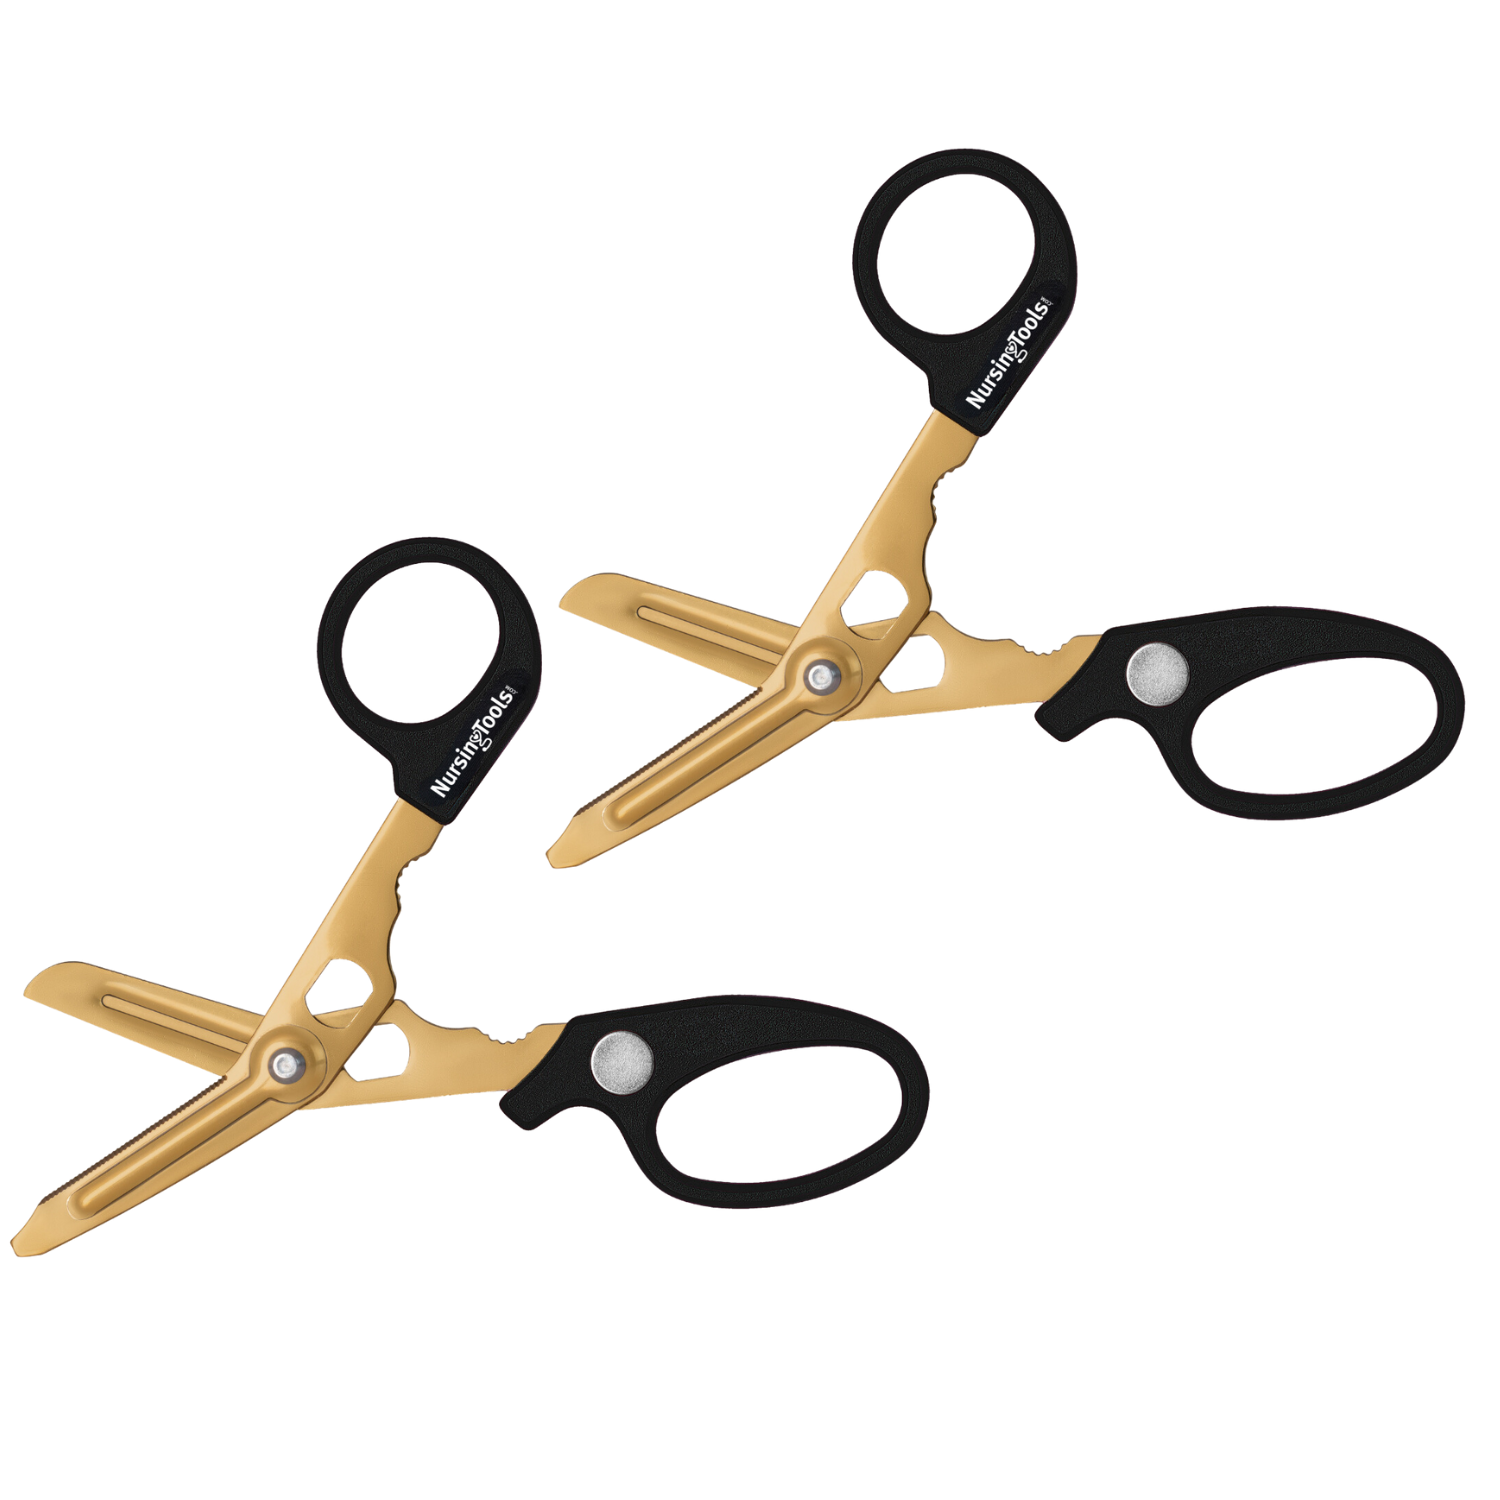 2-Pack Hummingbird 4-in-1 Medical Scissors - Compact Pocket Size